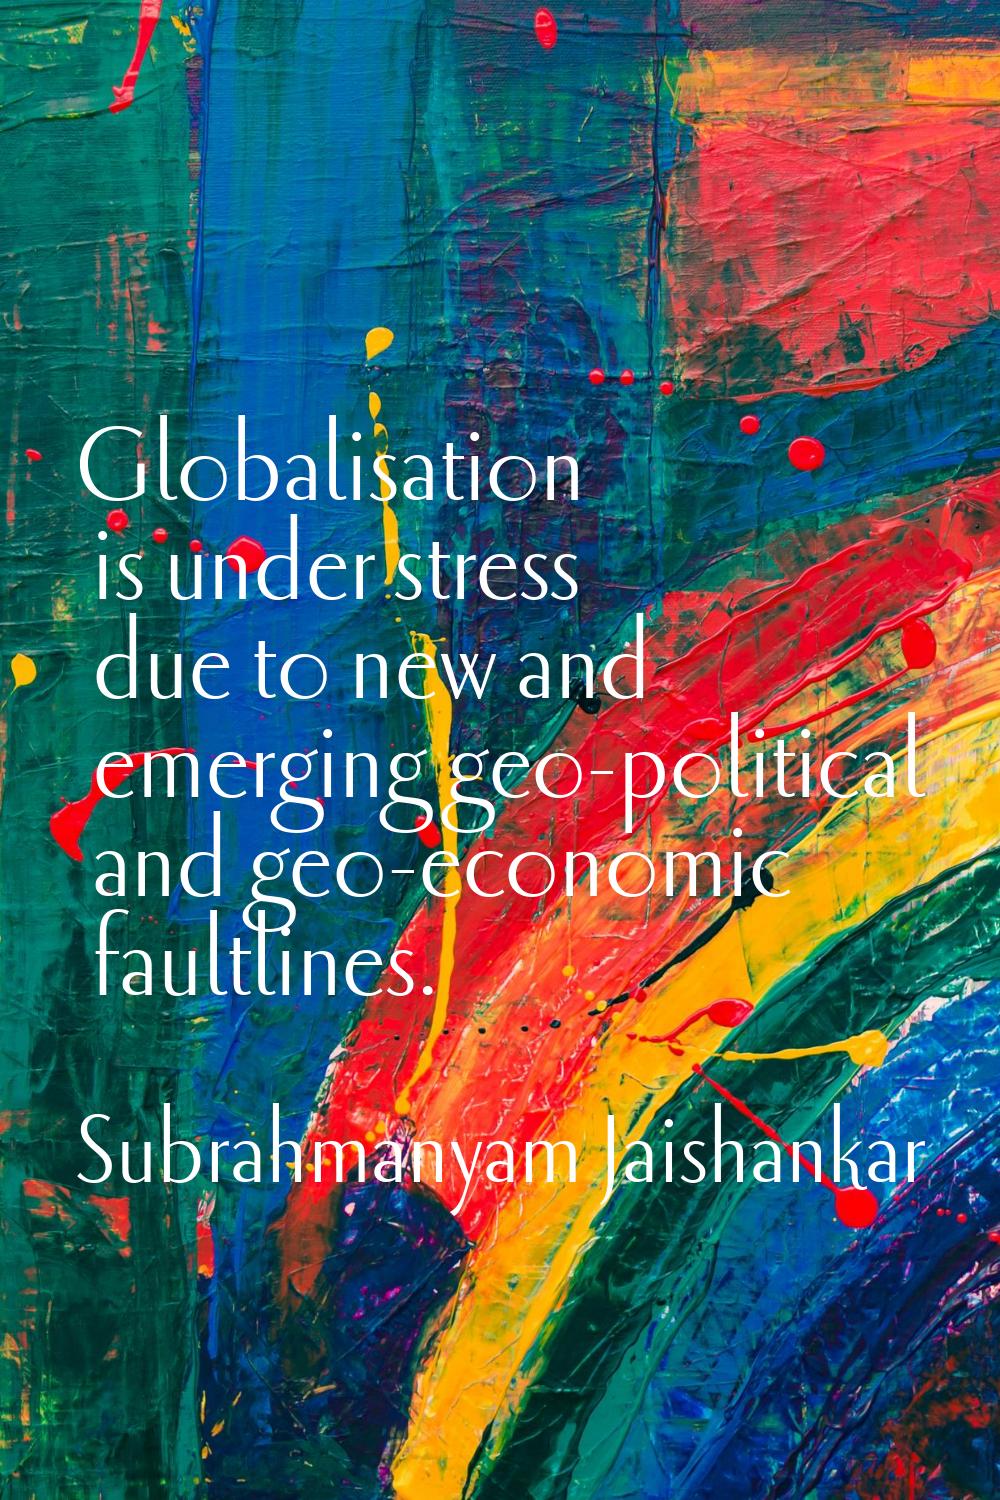 Globalisation is under stress due to new and emerging geo-political and geo-economic faultlines.